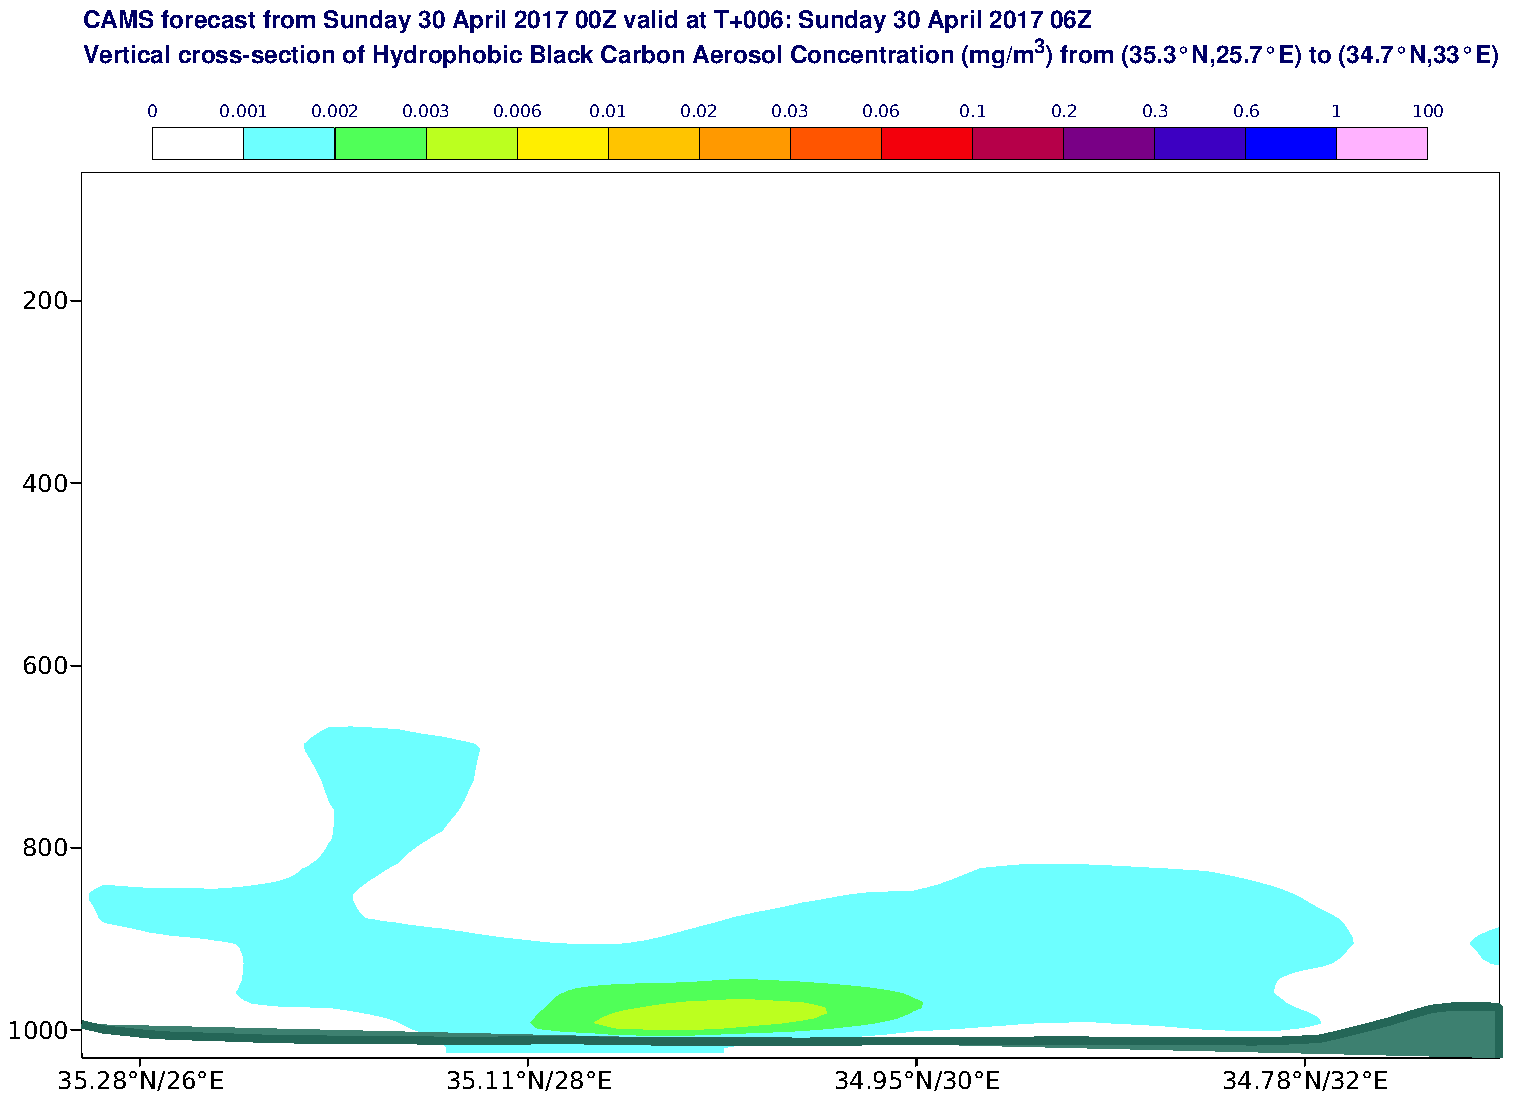 Vertical cross-section of Hydrophobic Black Carbon Aerosol Concentration (mg/m3) valid at T6 - 2017-04-30 06:00